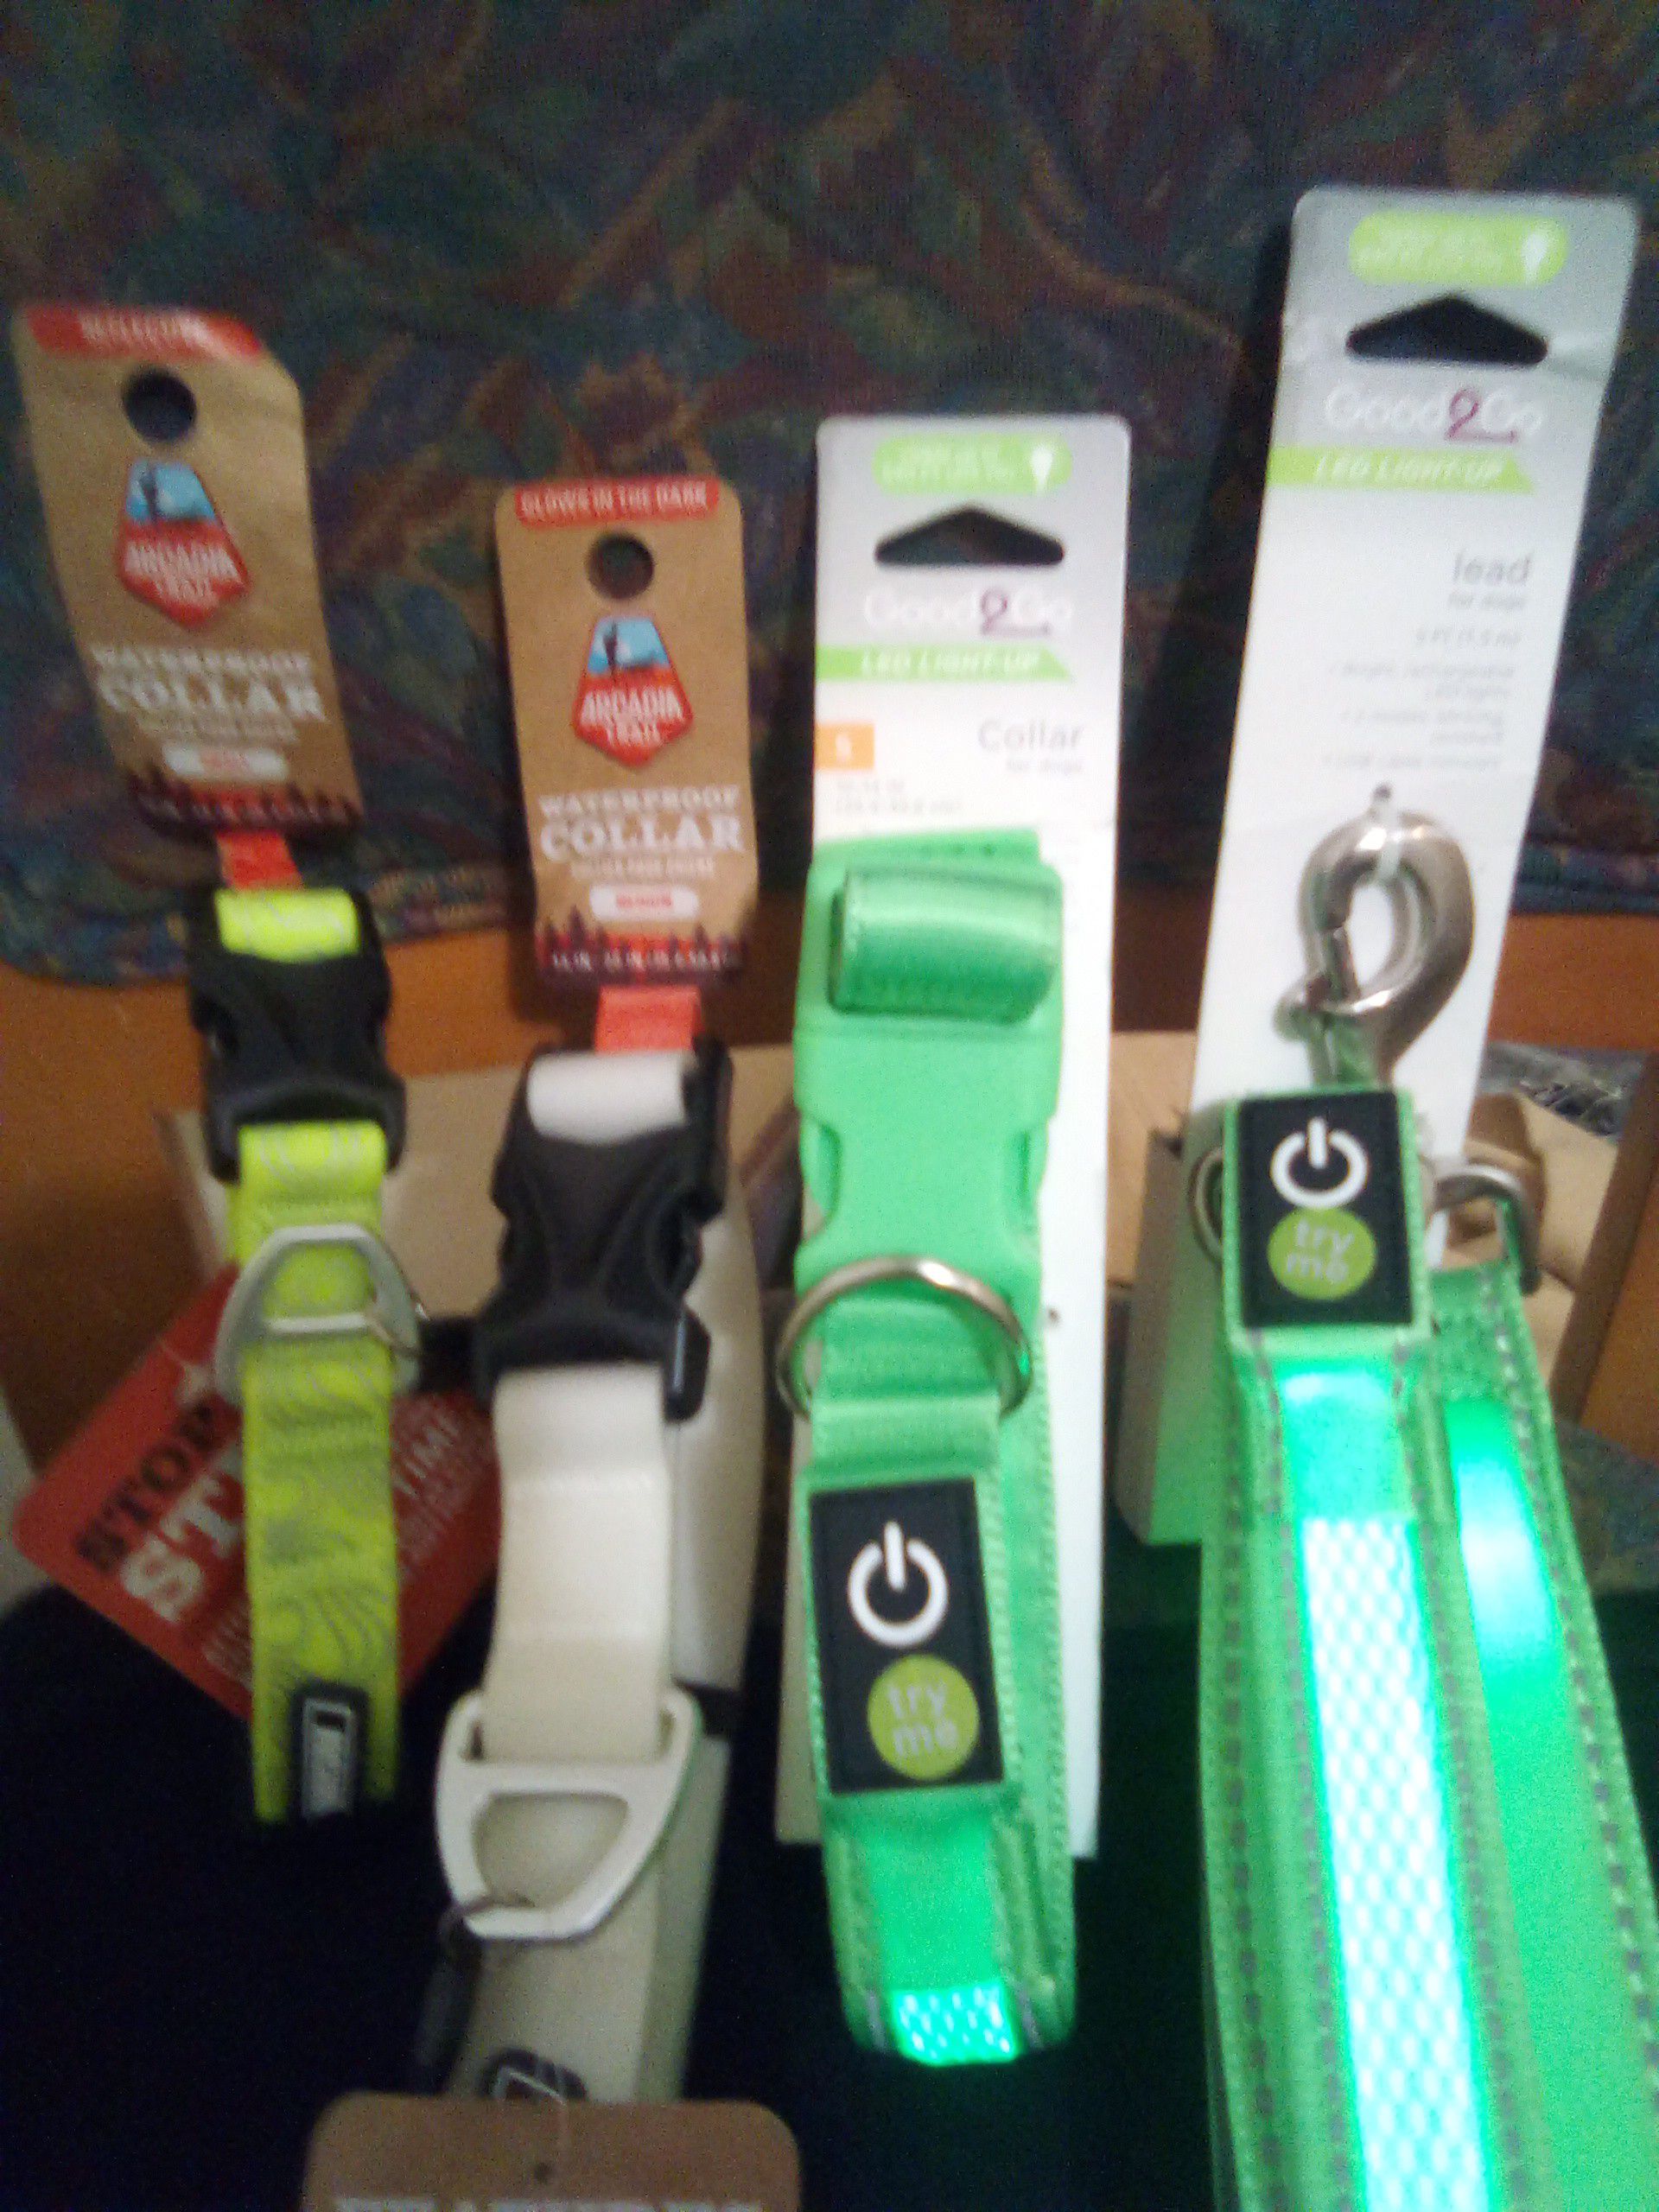 LED and glow in the dark dog collars and lead